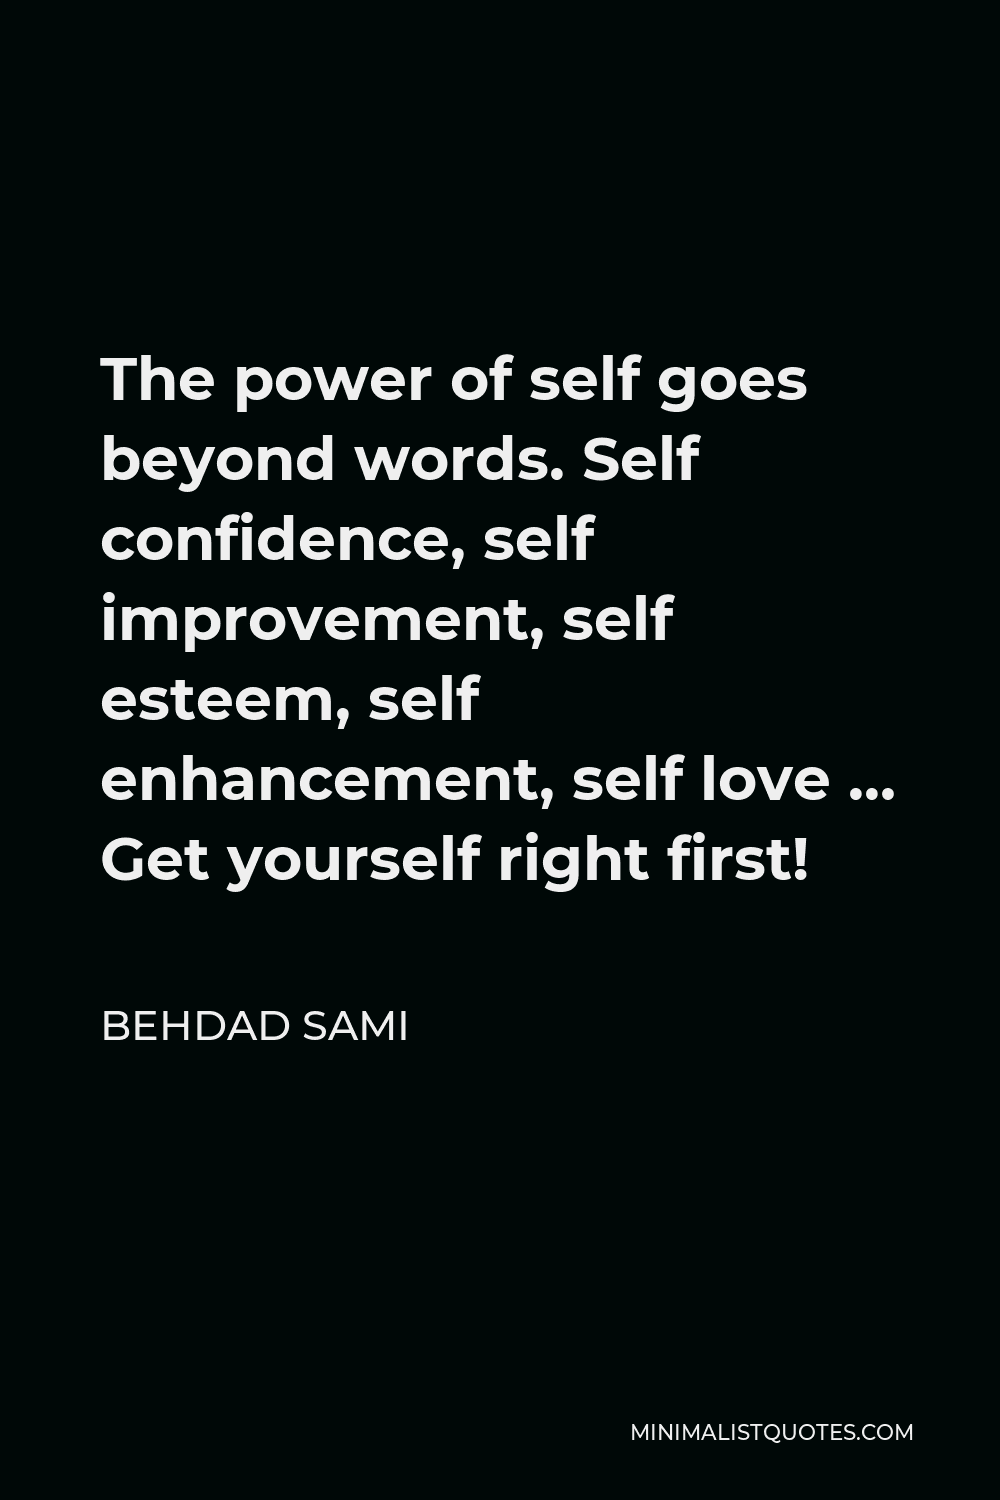 Behdad Sami Quote - The power of self goes beyond words. Self confidence, self improvement, self esteem, self enhancement, self love … Get yourself right first!